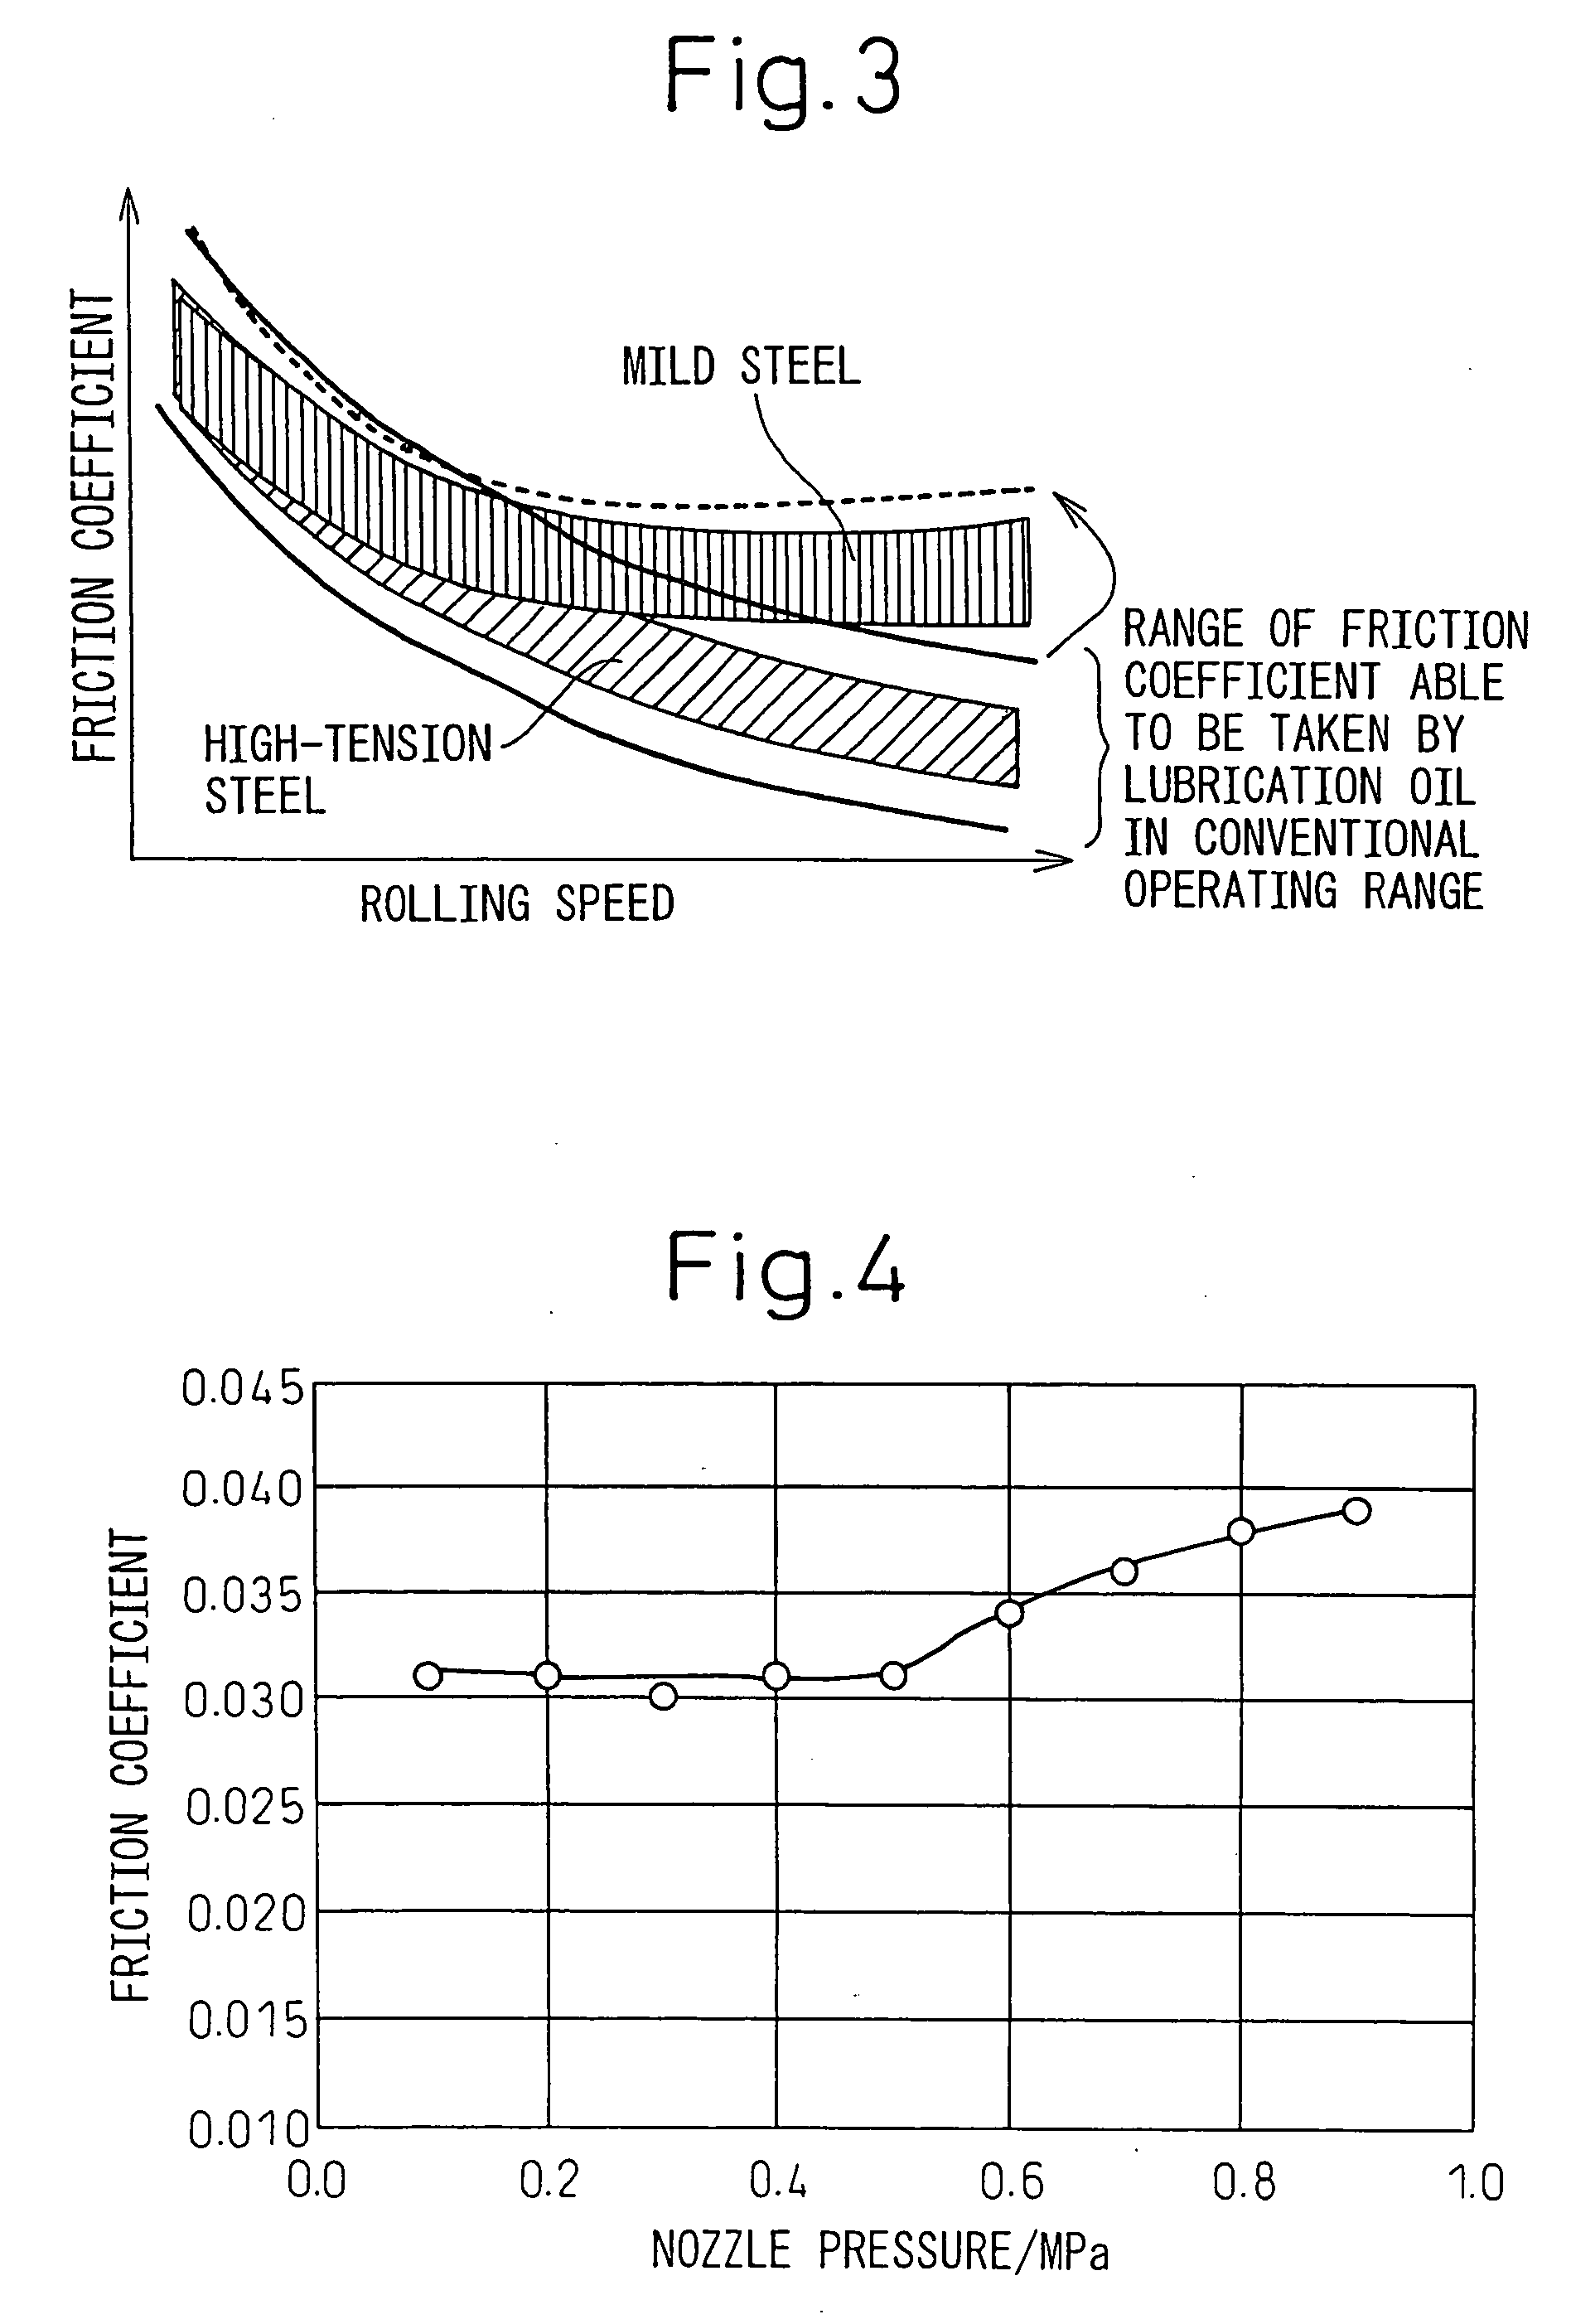 Method of Supplying Lubrication Oil in Cold Rolling